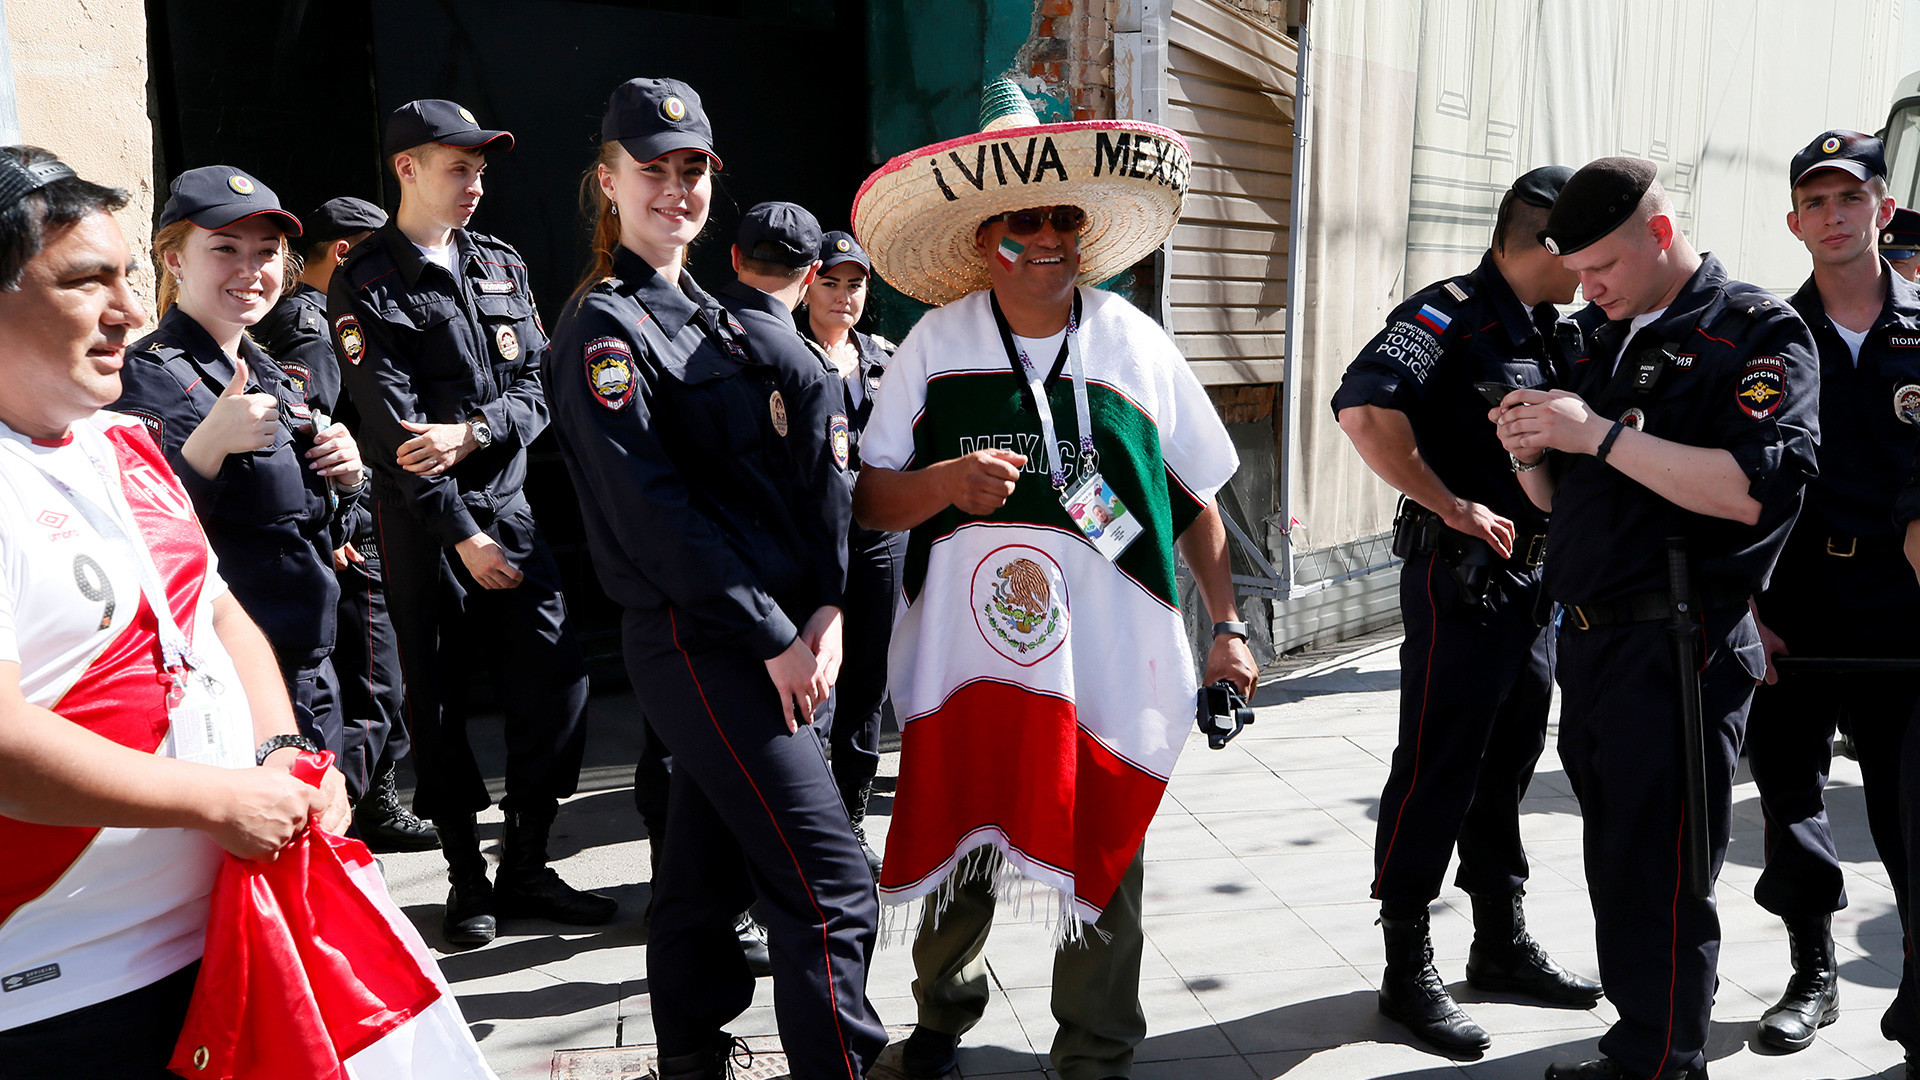  Supporters of the Mexican and Peruvian national teams, participants of the World Cup, and Russian police officers in central Moscow, Russia, June 15, 2018.